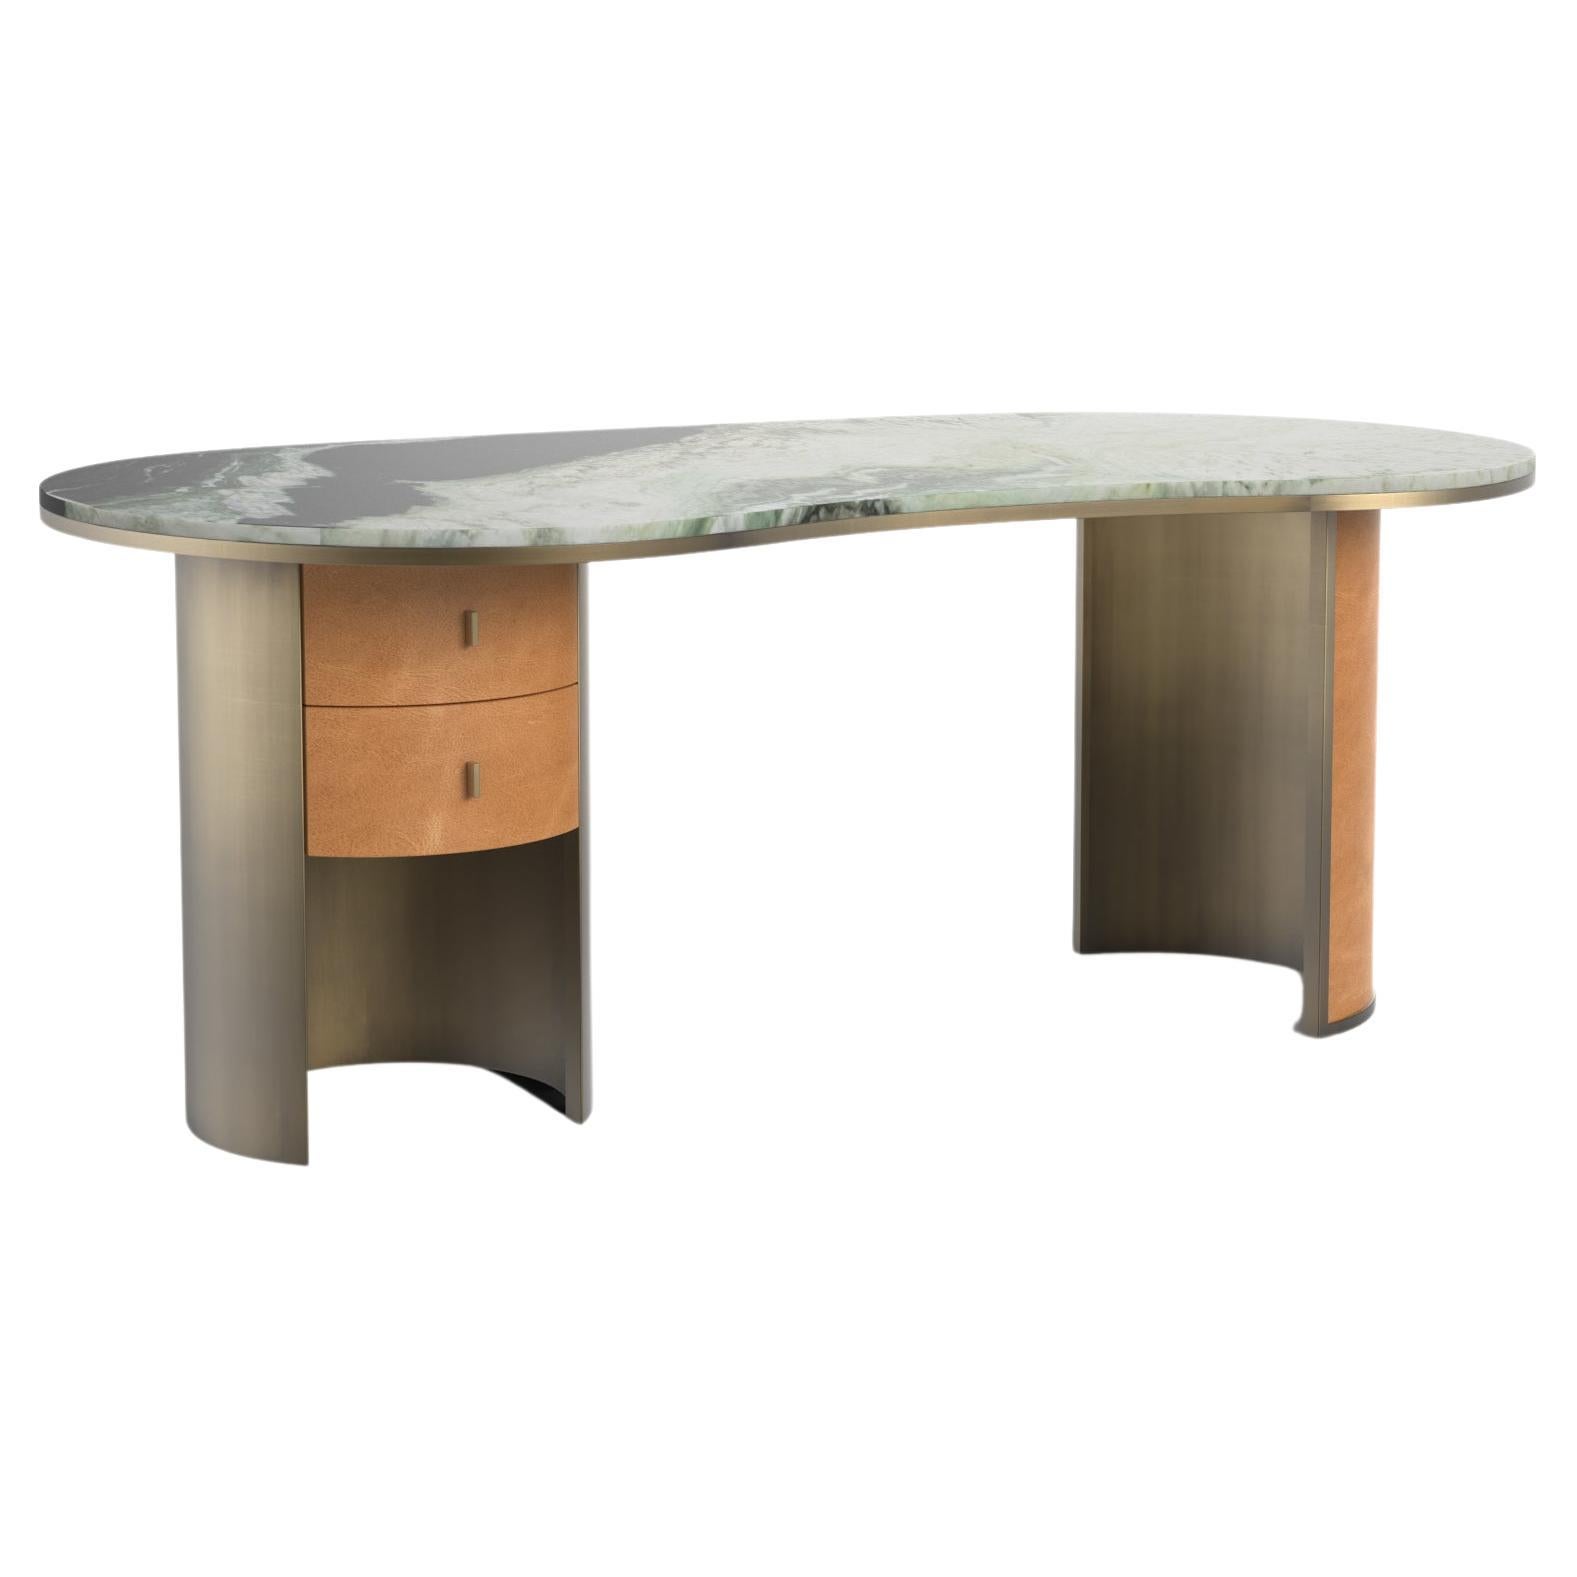 Rute Martins Desks and Writing Tables